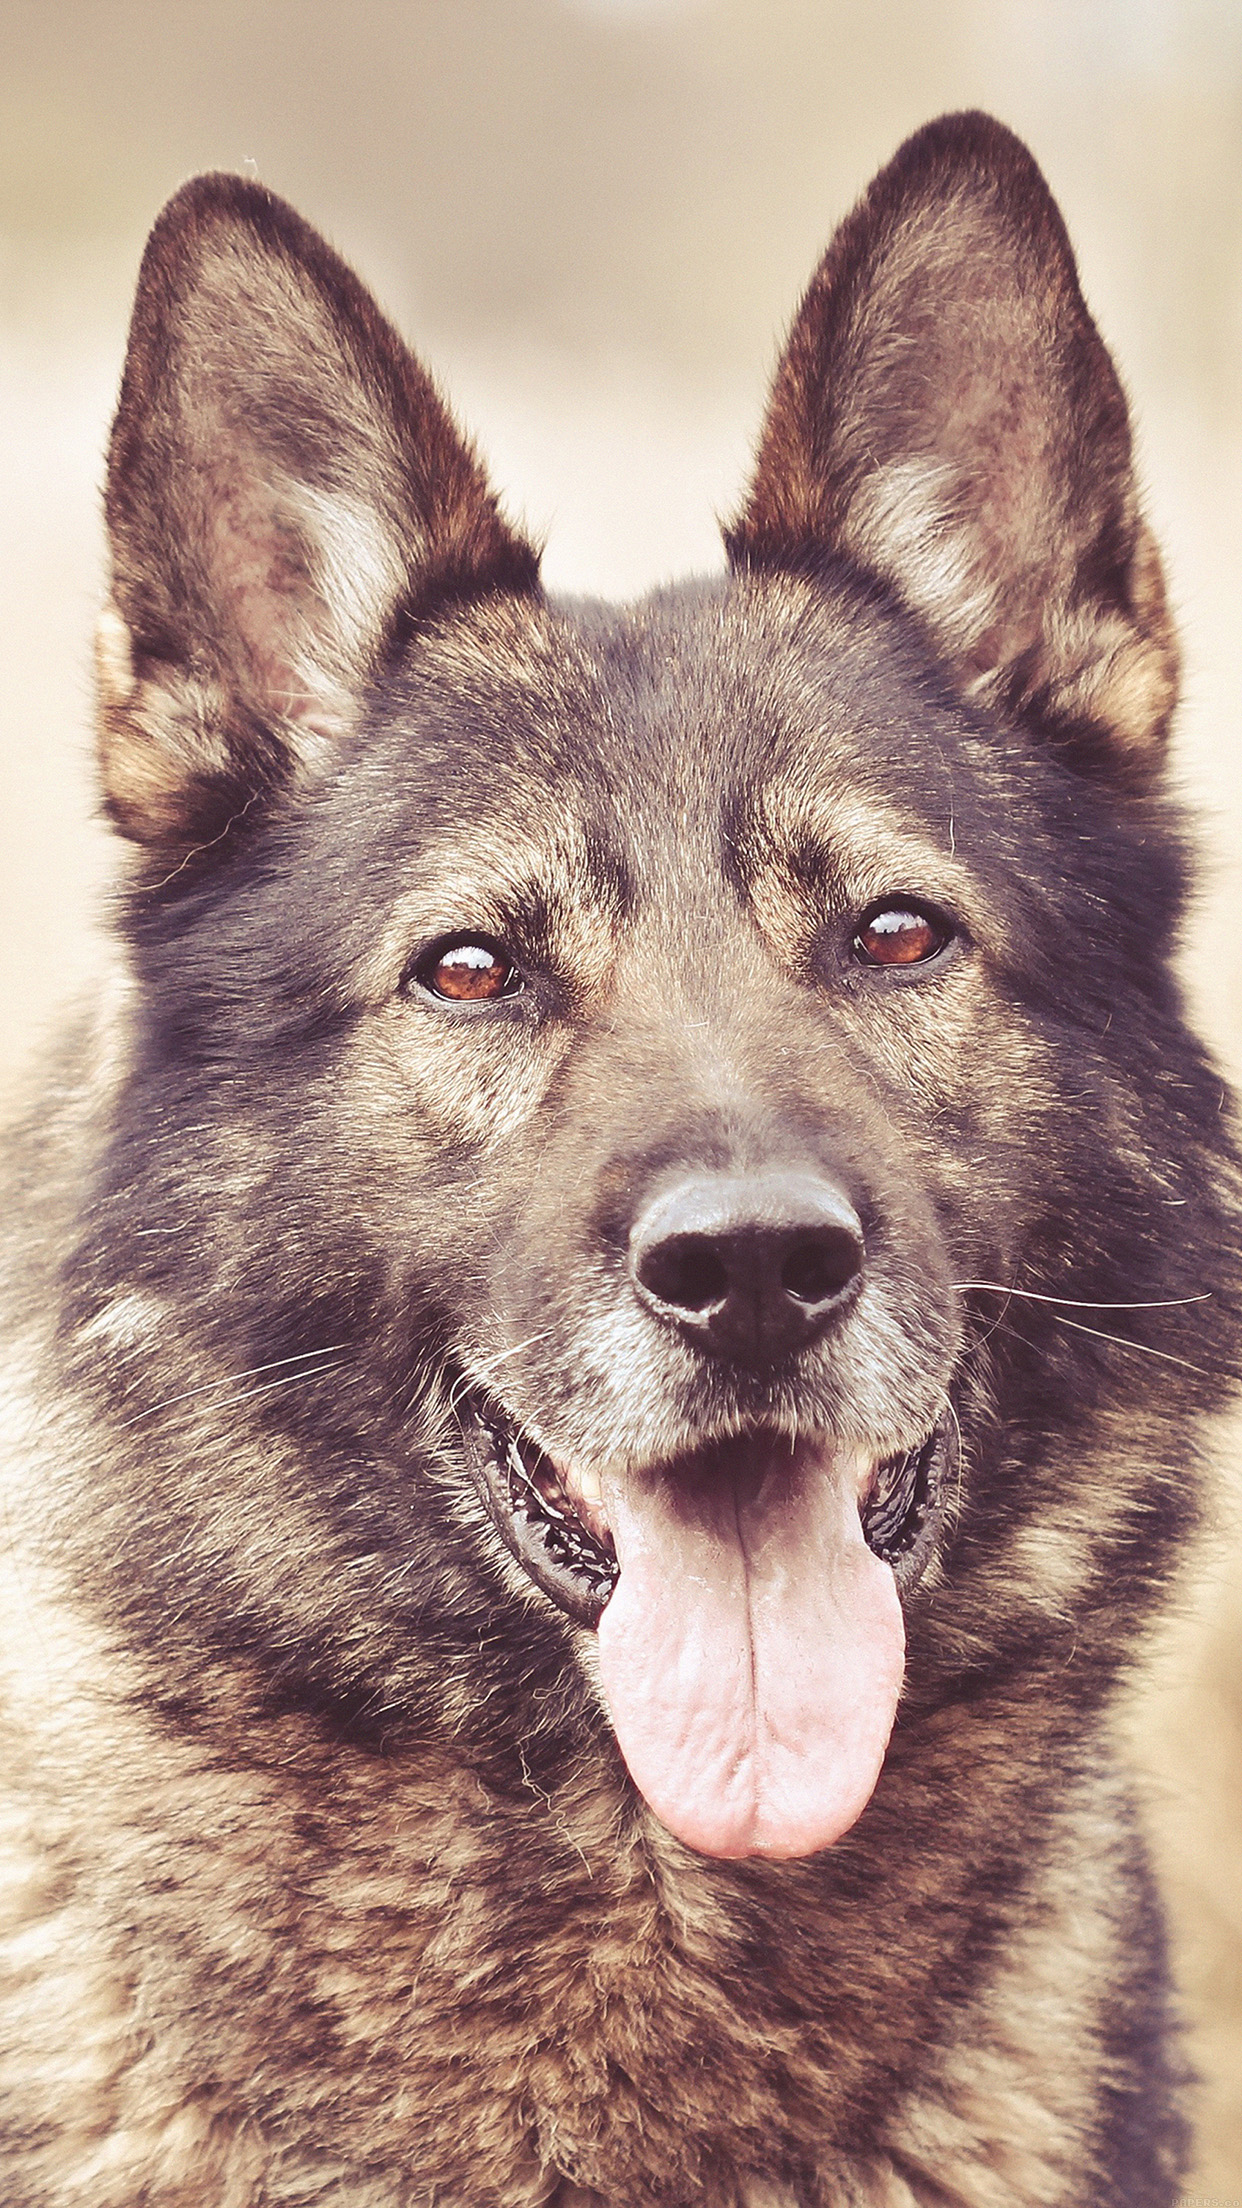 My Shepherds Dog Smile Animal Nature Android wallpaper